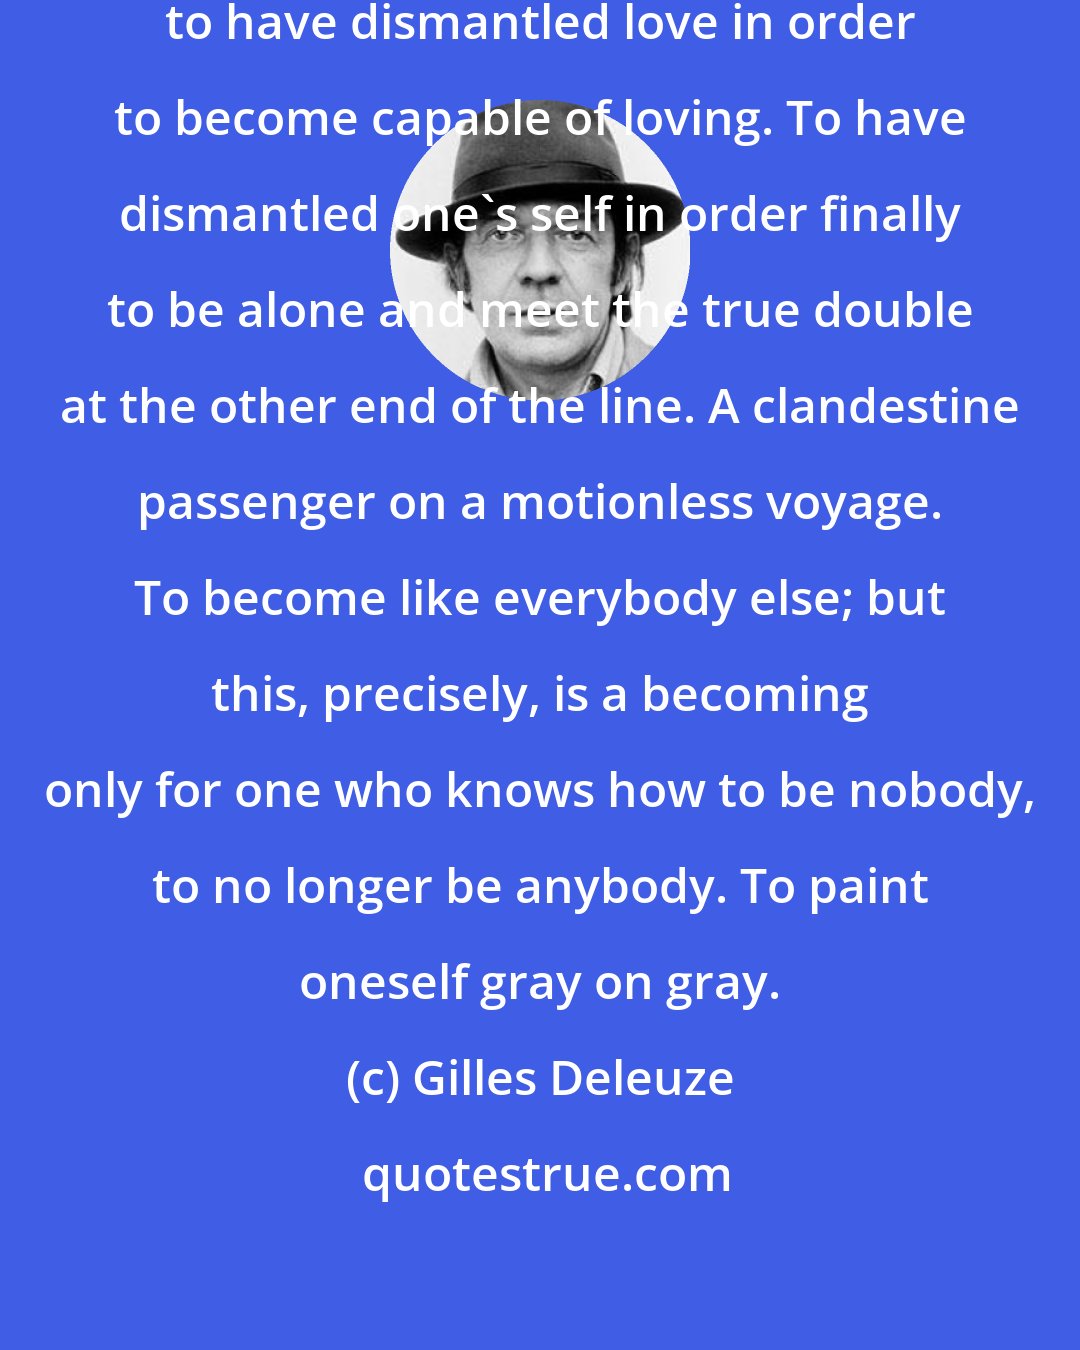 Gilles Deleuze: To become imperceptible oneself, to have dismantled love in order to become capable of loving. To have dismantled one's self in order finally to be alone and meet the true double at the other end of the line. A clandestine passenger on a motionless voyage. To become like everybody else; but this, precisely, is a becoming only for one who knows how to be nobody, to no longer be anybody. To paint oneself gray on gray.